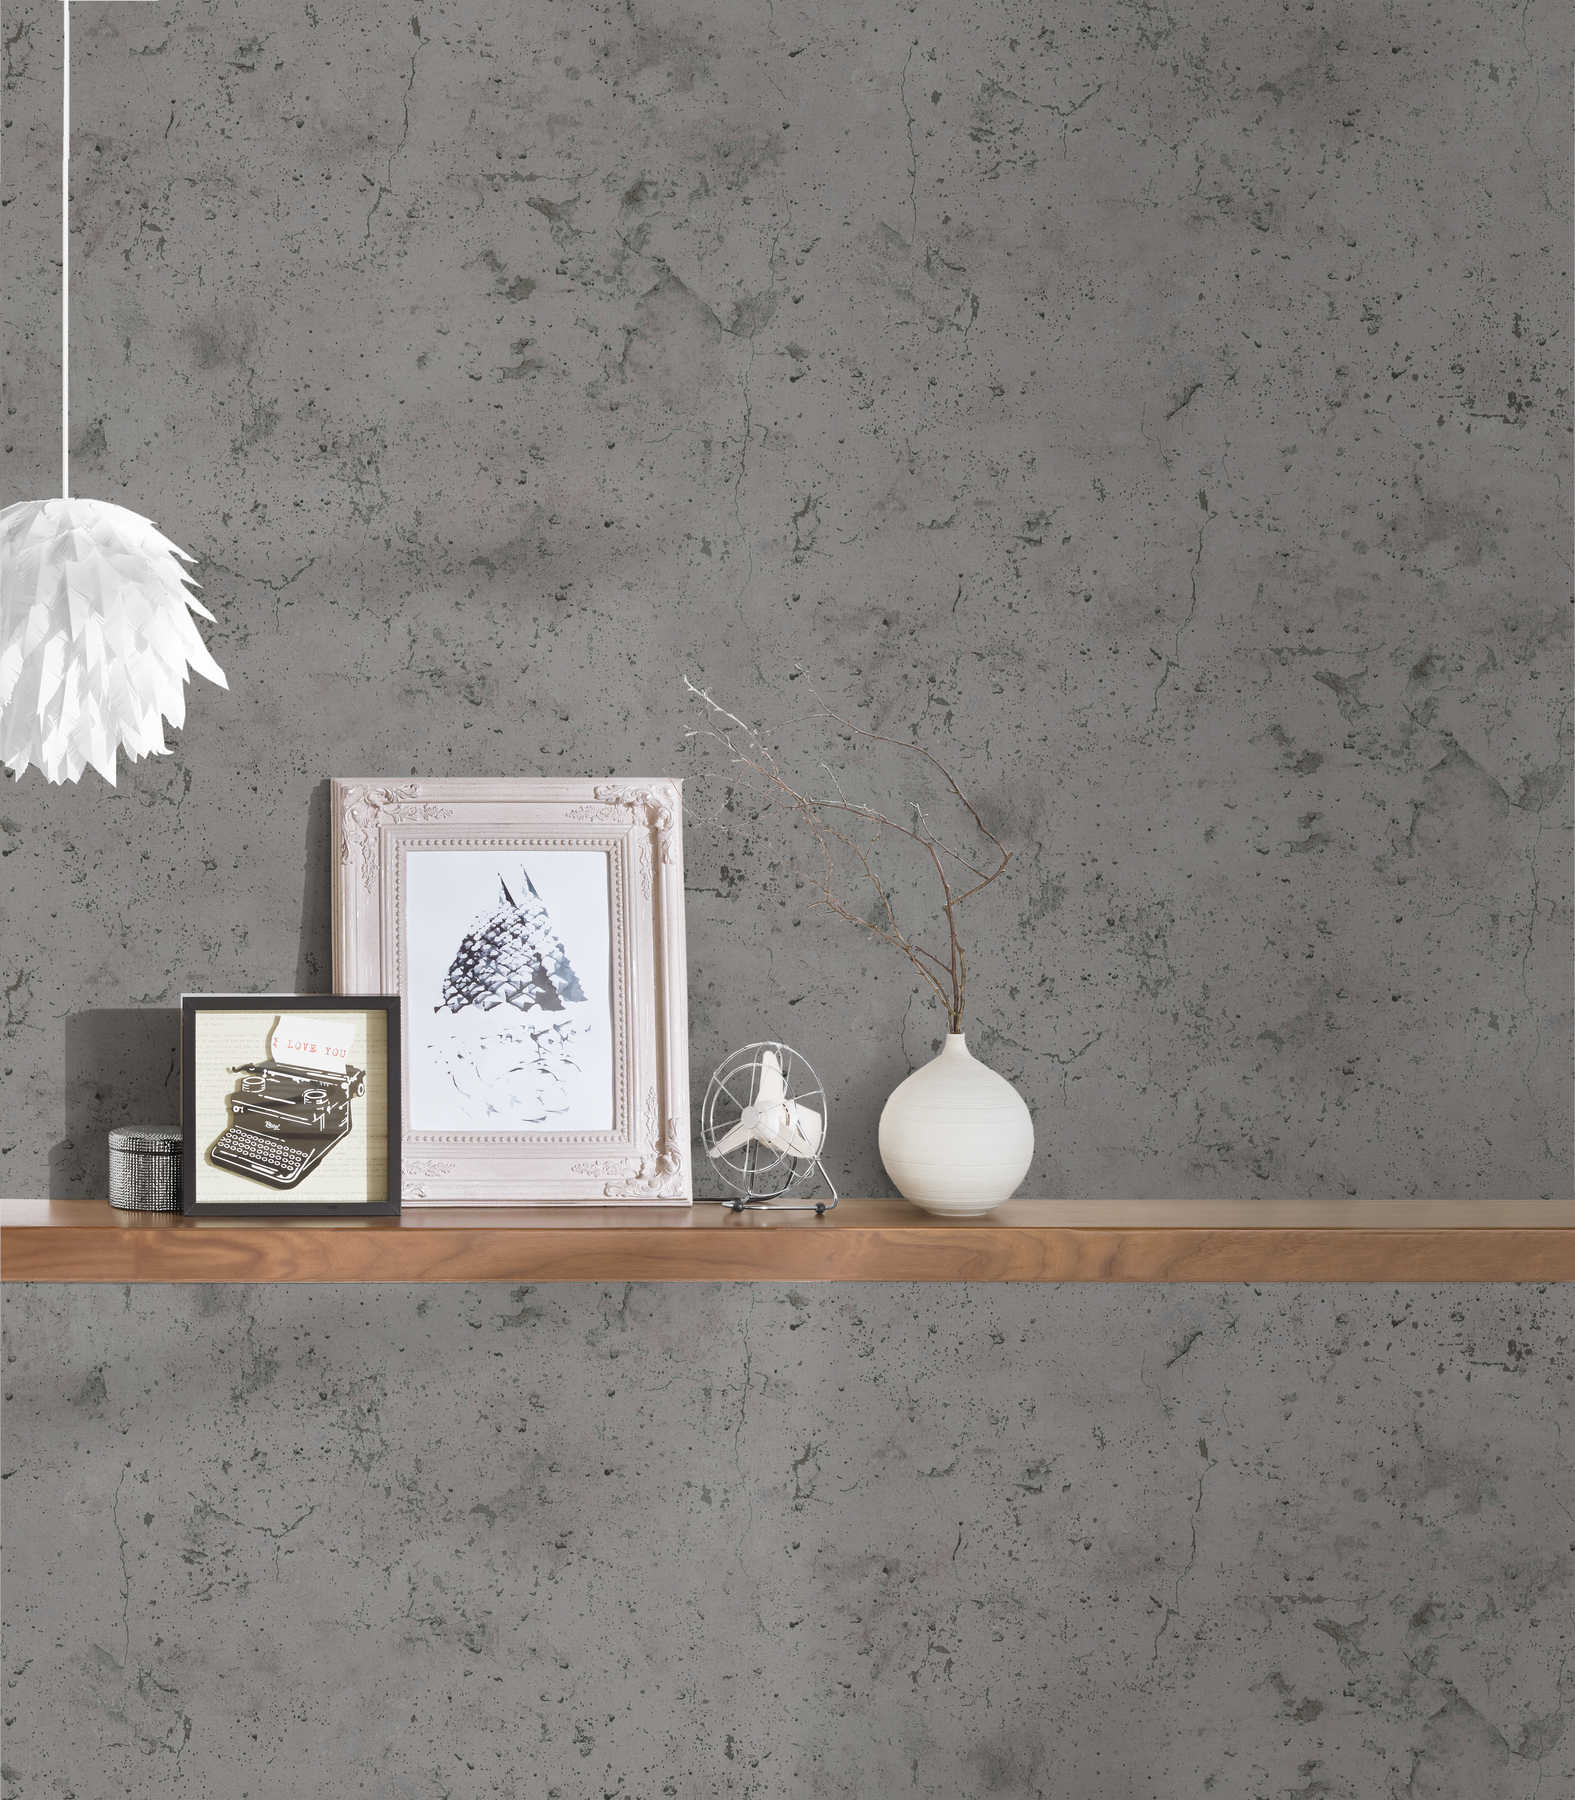             Concrete wallpaper in industrial style - grey-brown, taupe
        